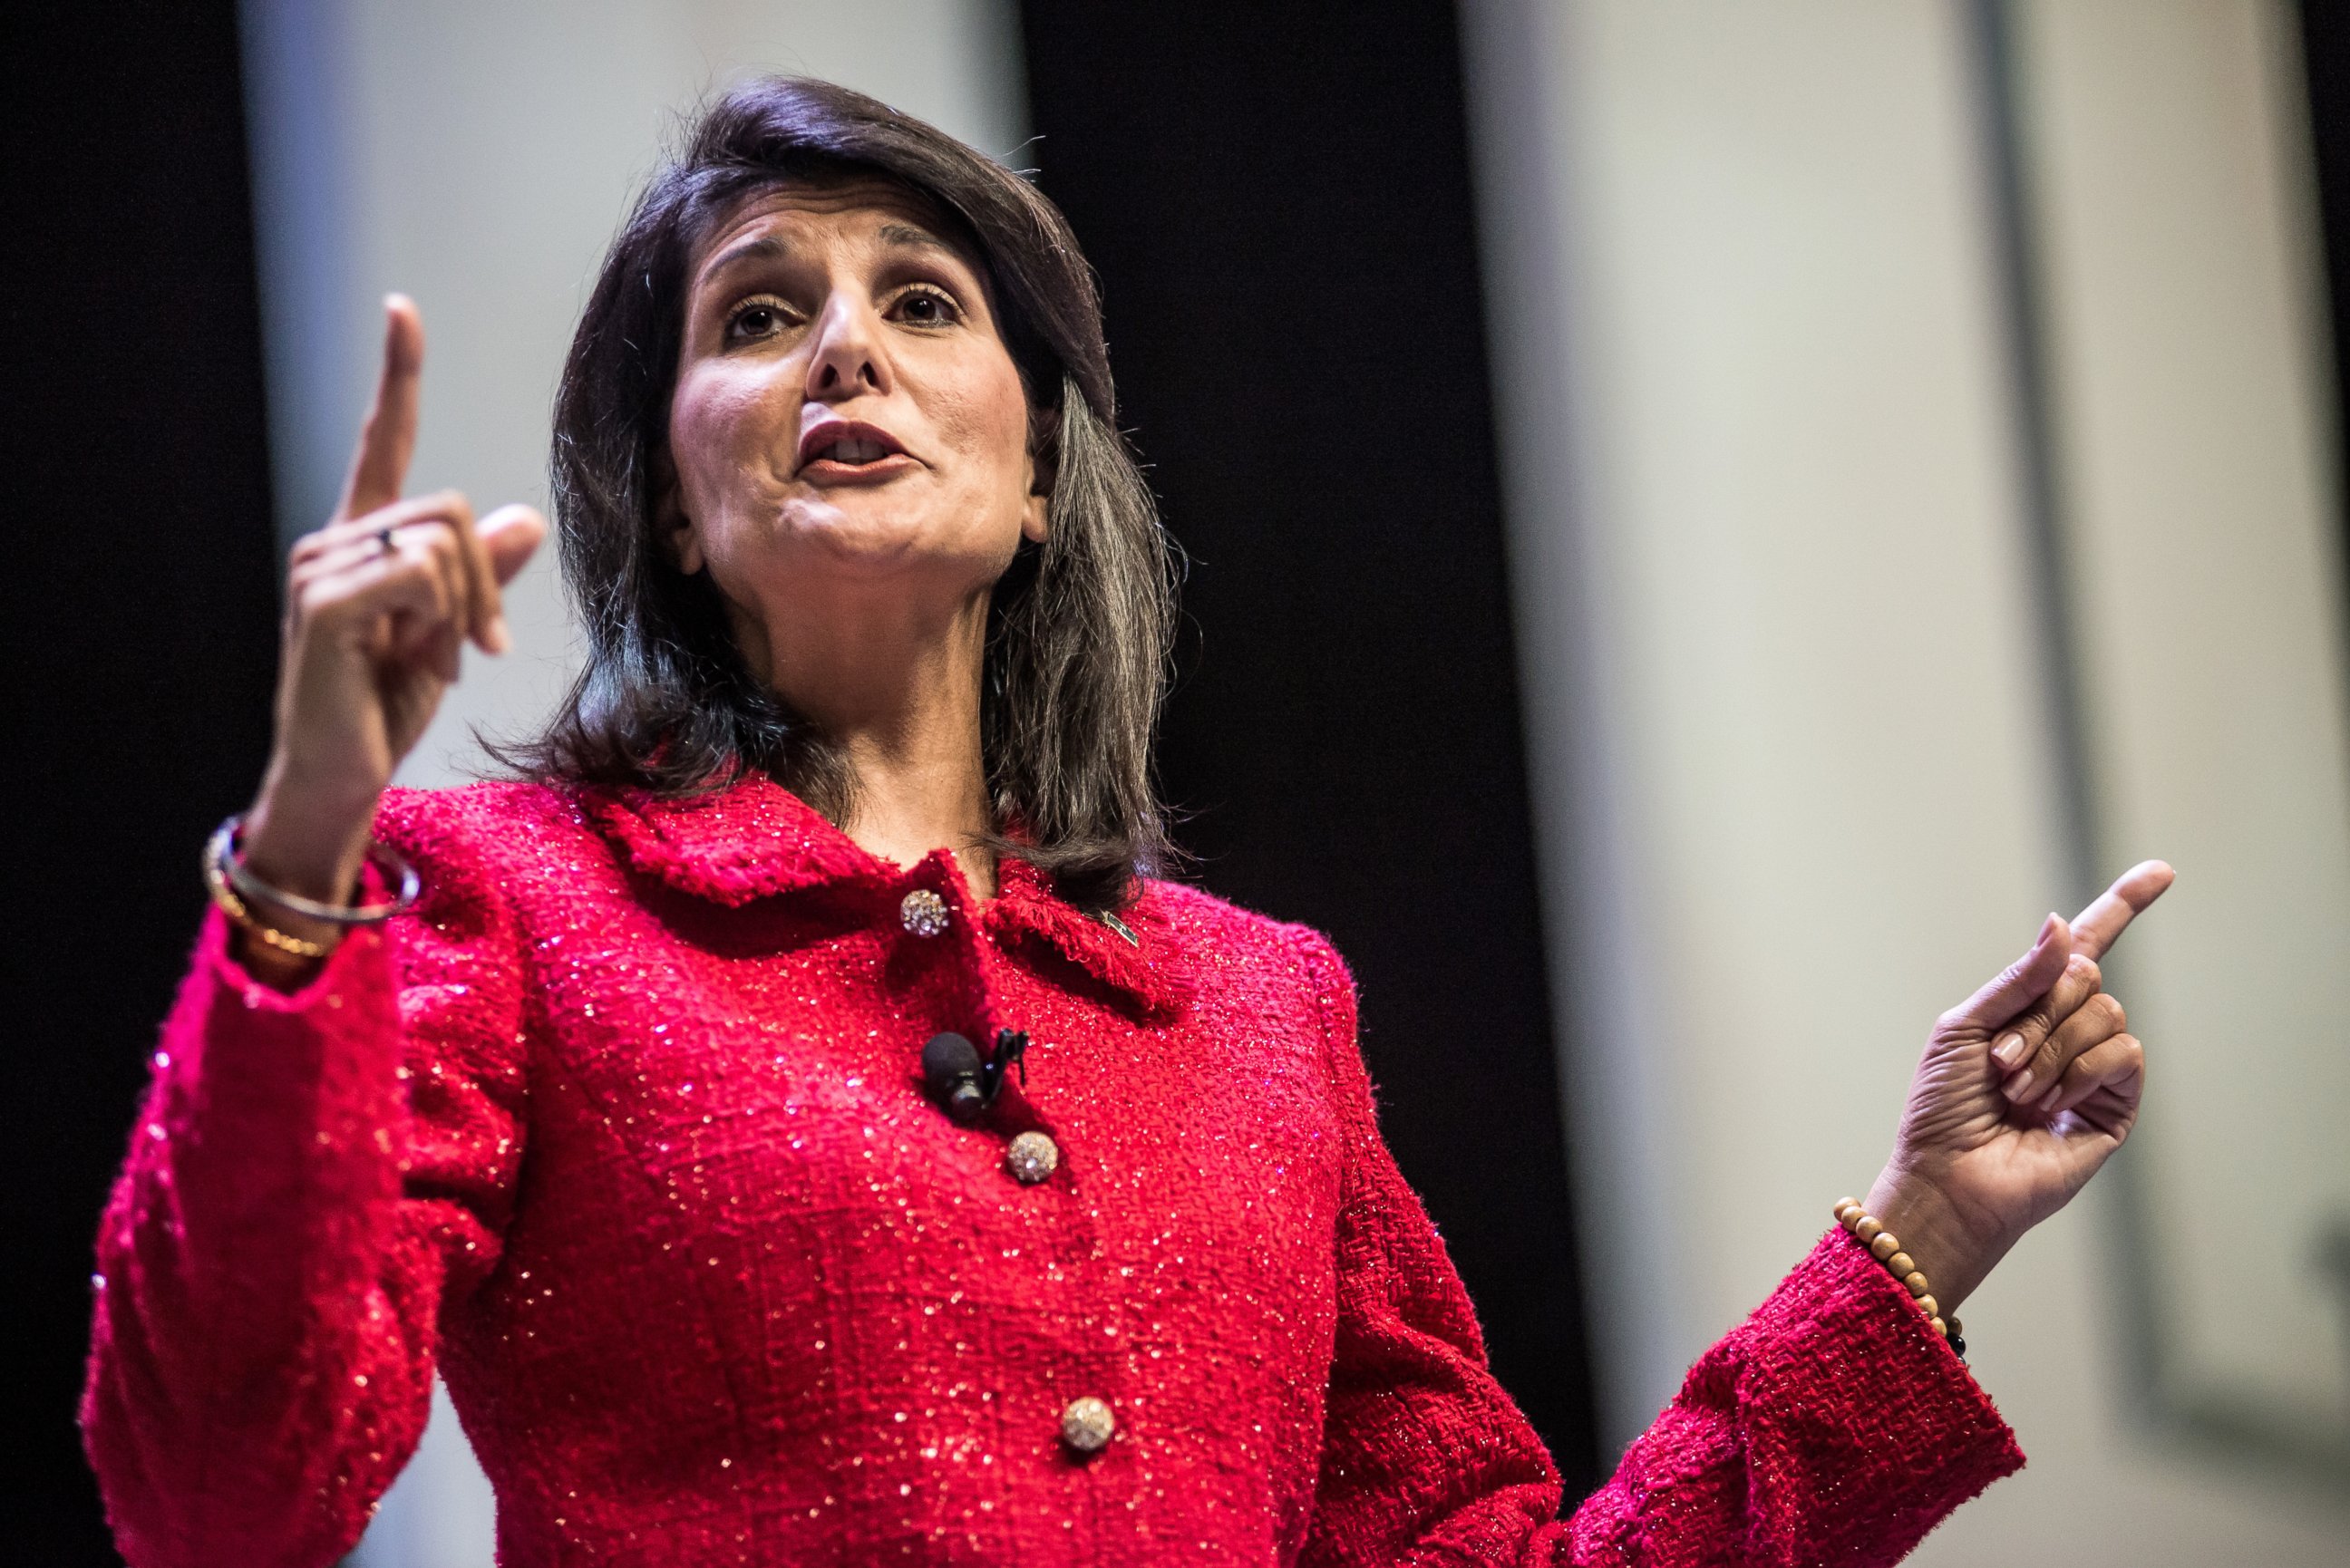 PHOTO: South Carolina Governor and moderator of the Heritage Action Presidential Candidate Forum Nikki Haley speaks to the crowd, Sept. 18, 2015, in Greenville, South Carolina.